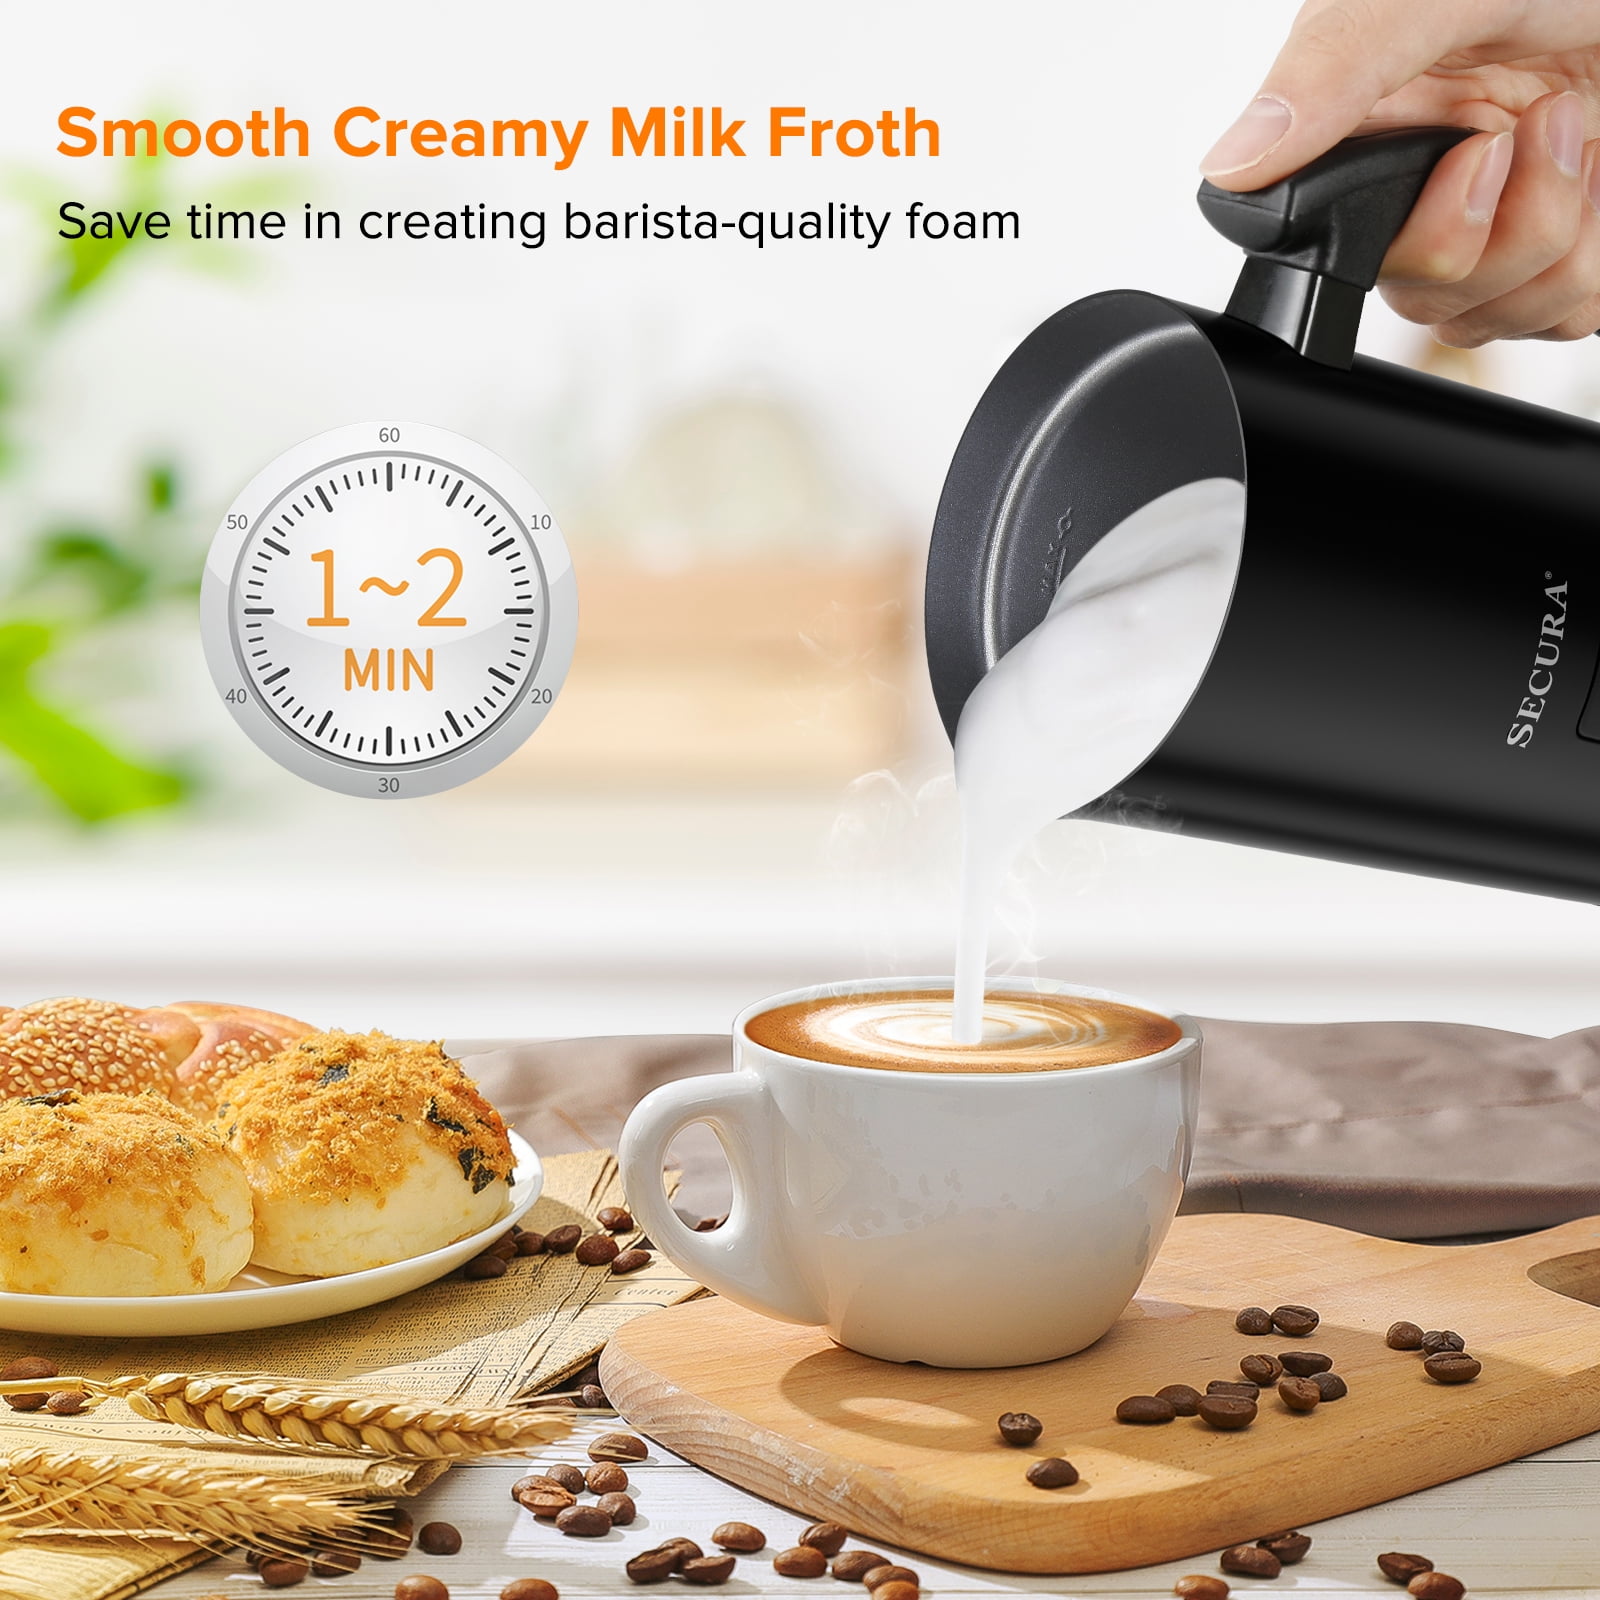 Secura Coffee Milk Frother, 5-IN-1 Electric Milk Steamer with Detachable  Stainless Steel Jug Automatic Hot/Cold Foam Hot Chocolate Maker with LED  Touch Screen, Temperature Display, Induction Heating : Precio Guatemala